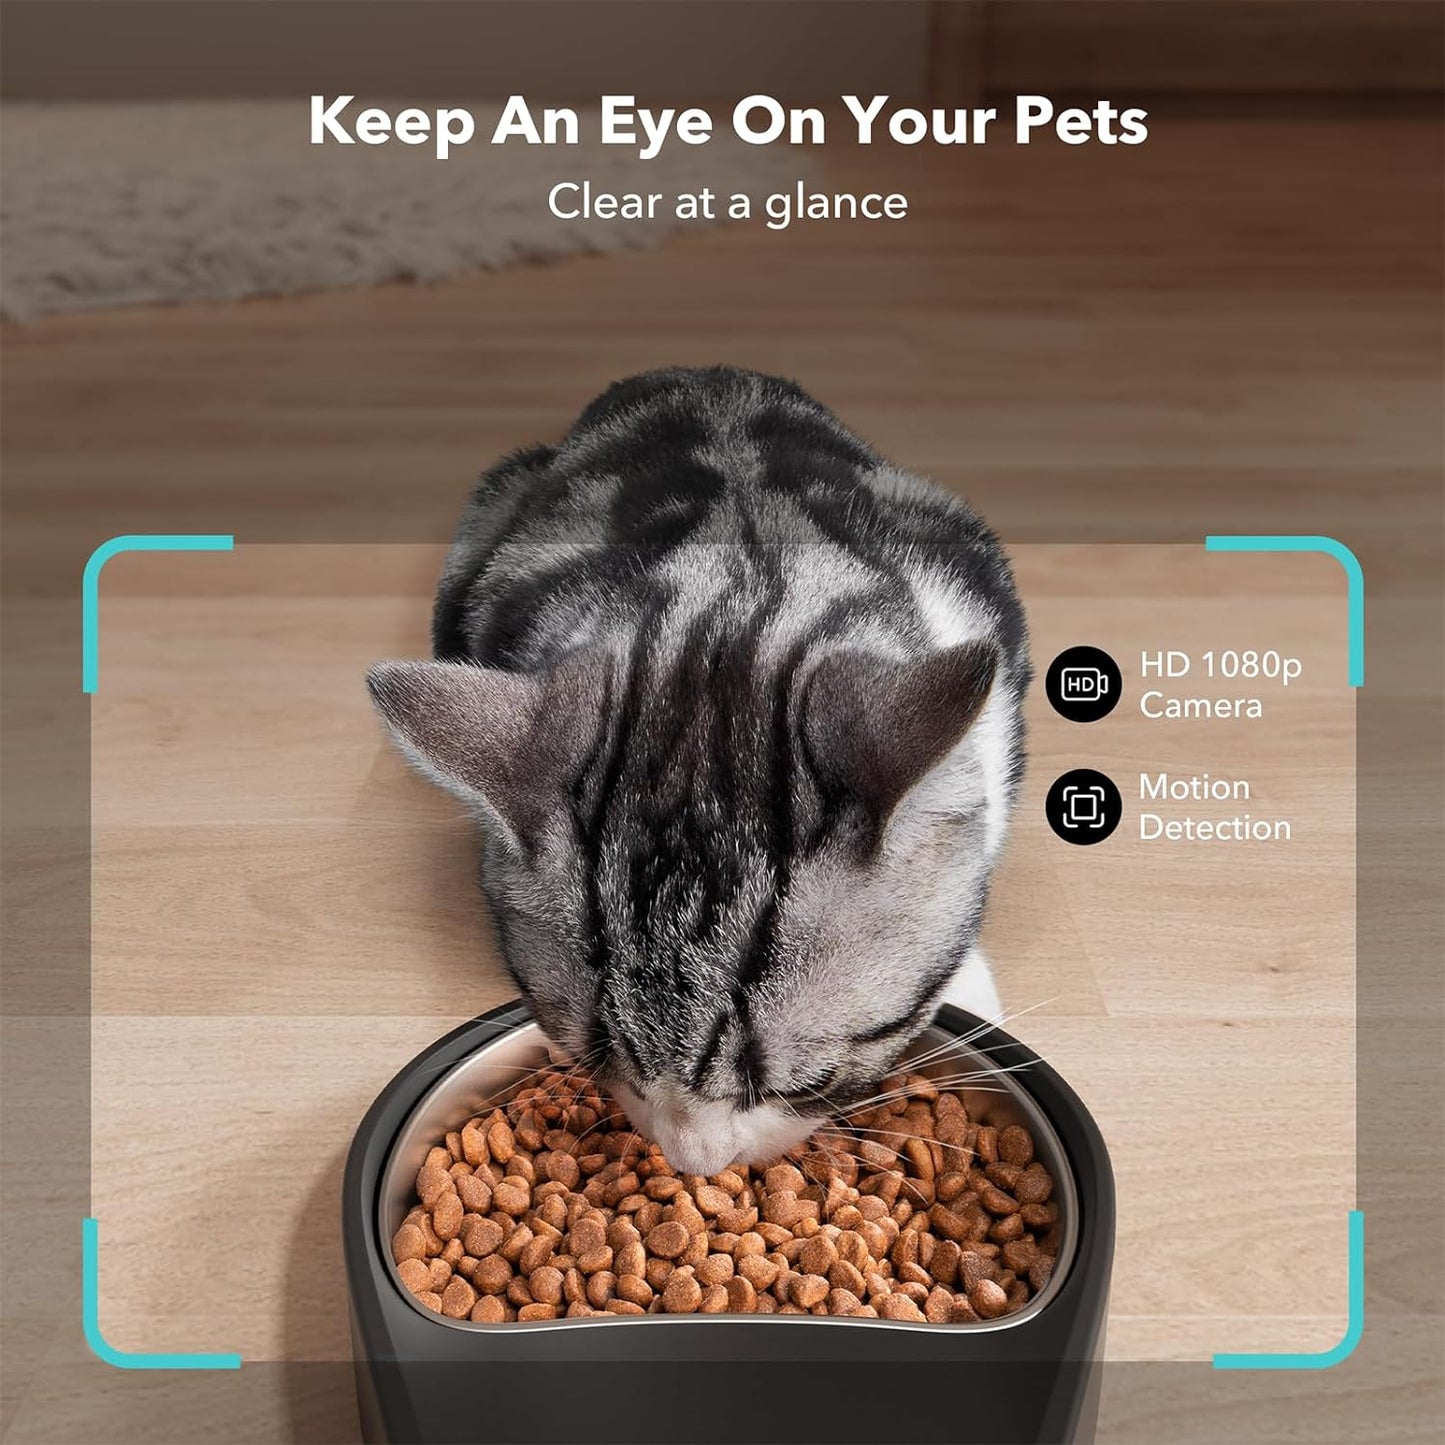 PETLIBRO Automatic Cat Feeder with Camera, 1080P HD Video with Night Vision